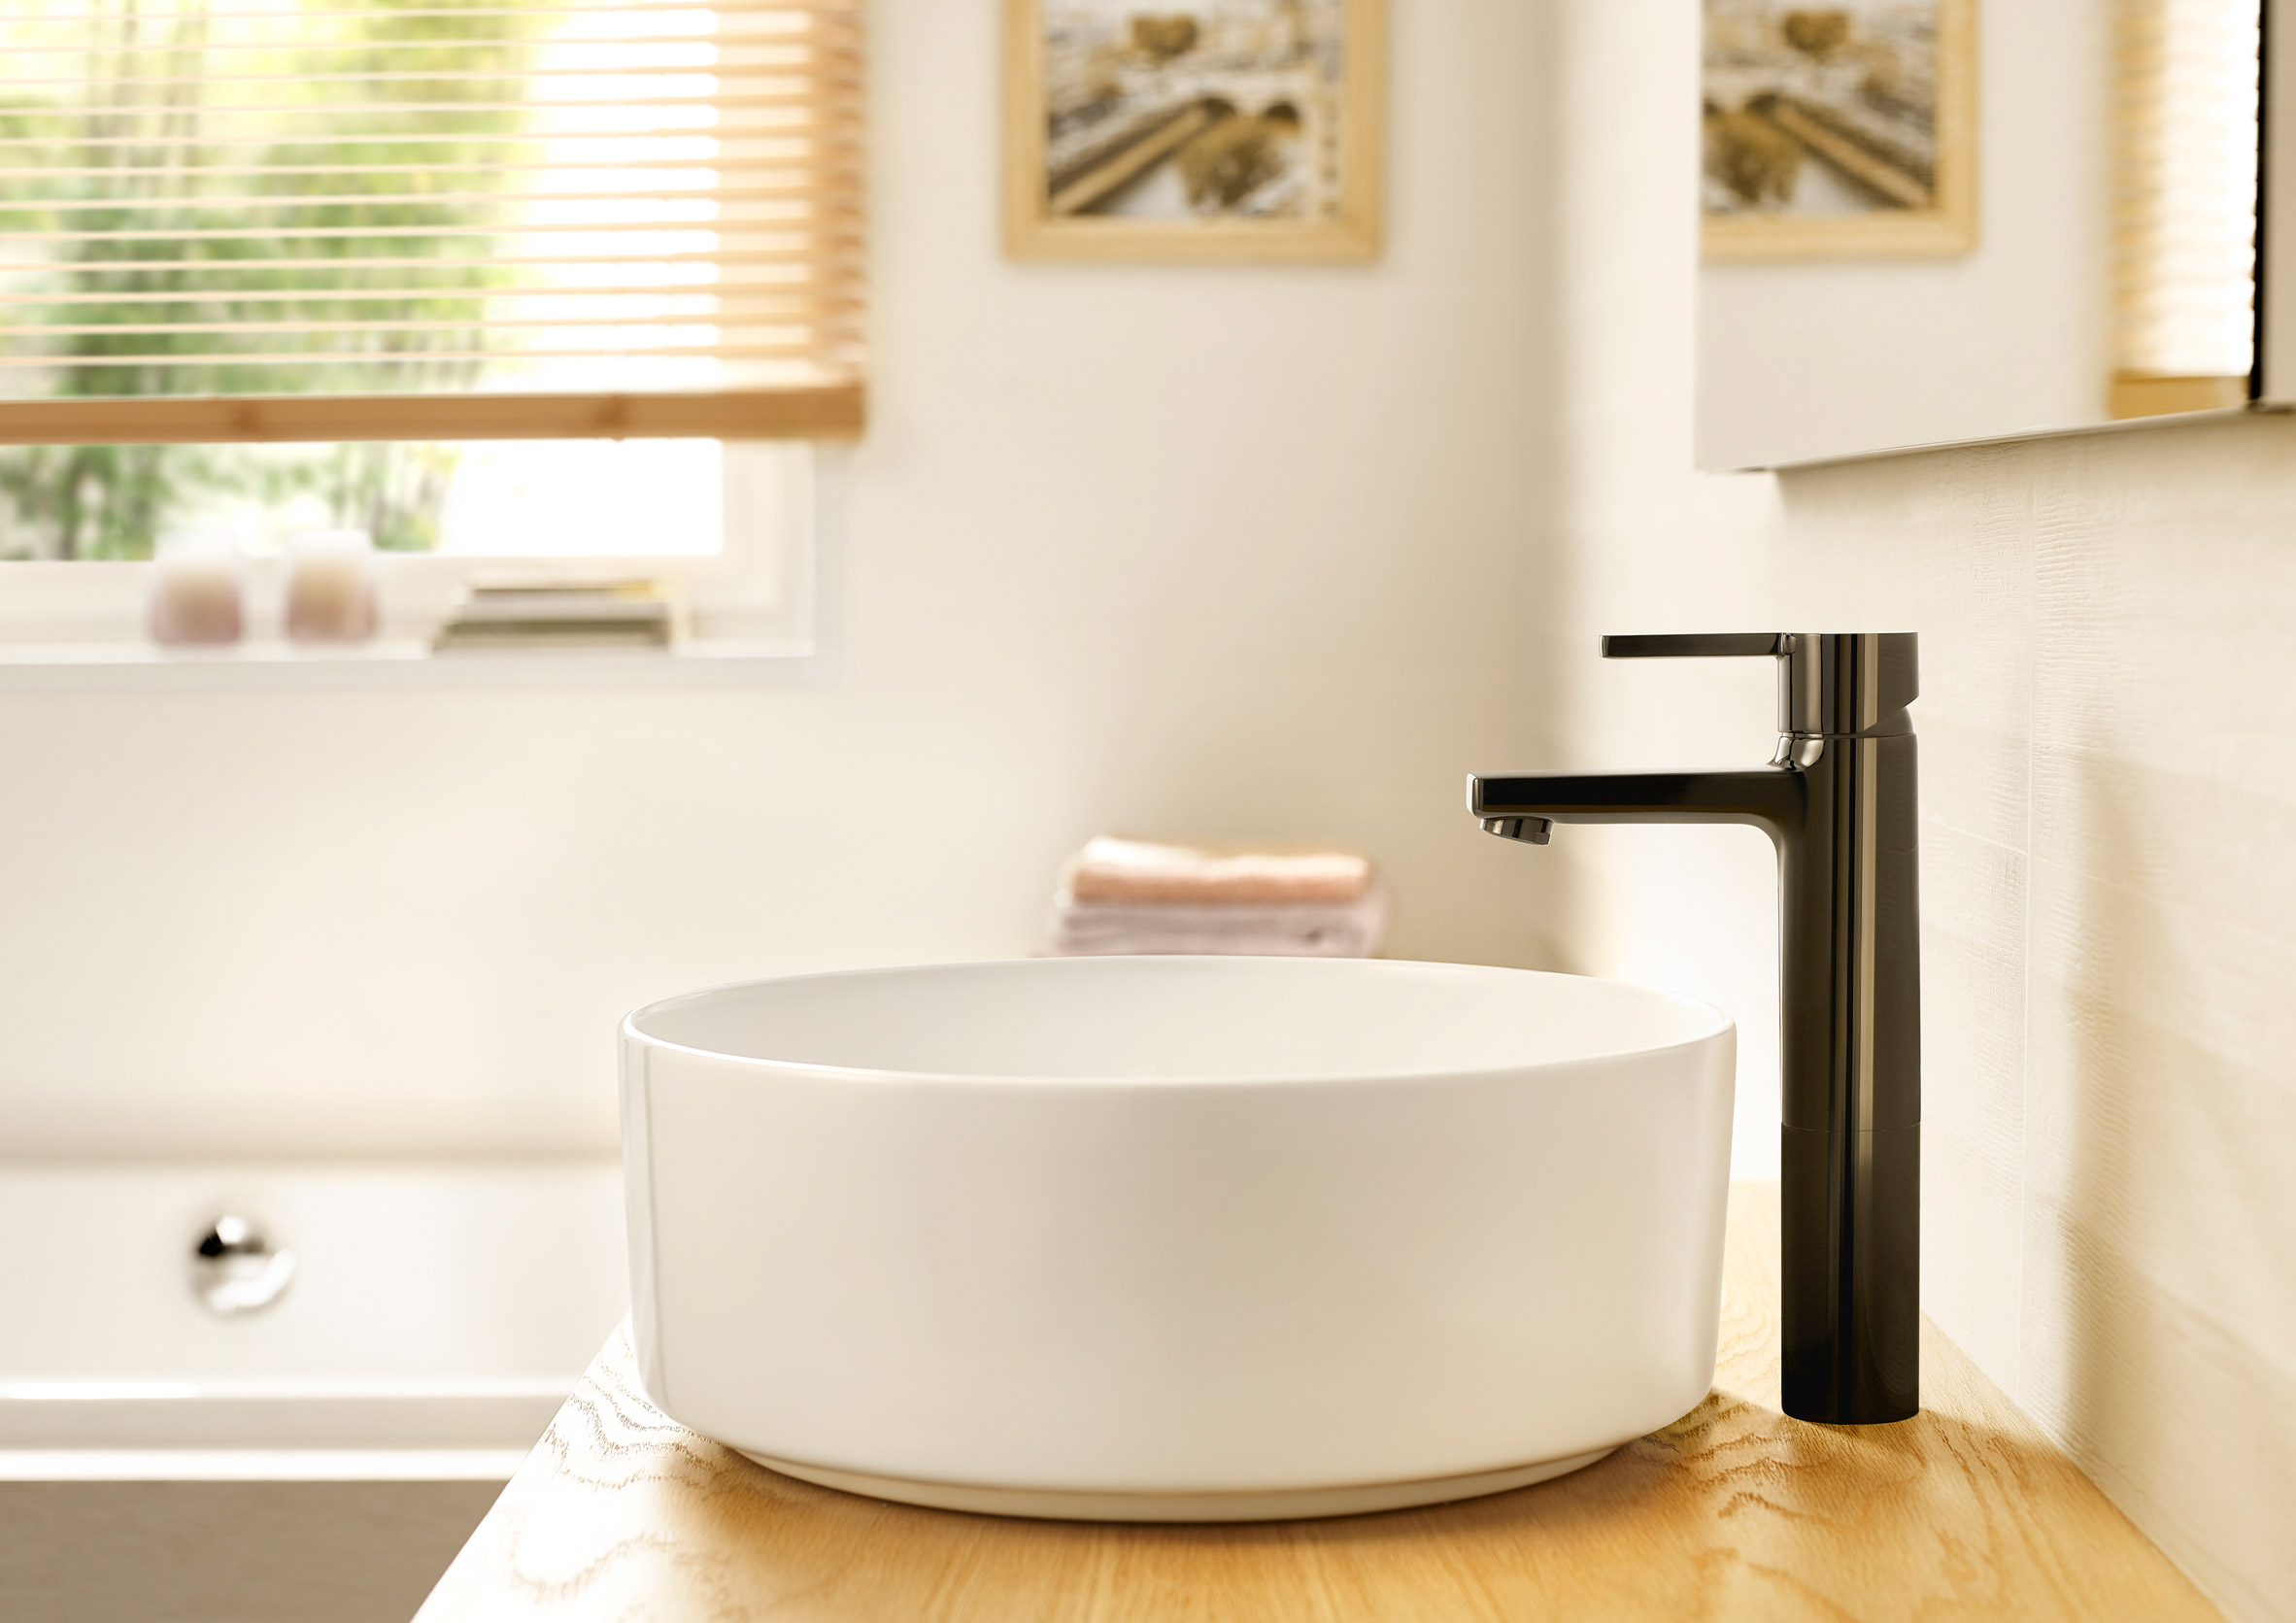 Roca launches bathroom collection made from Surfex